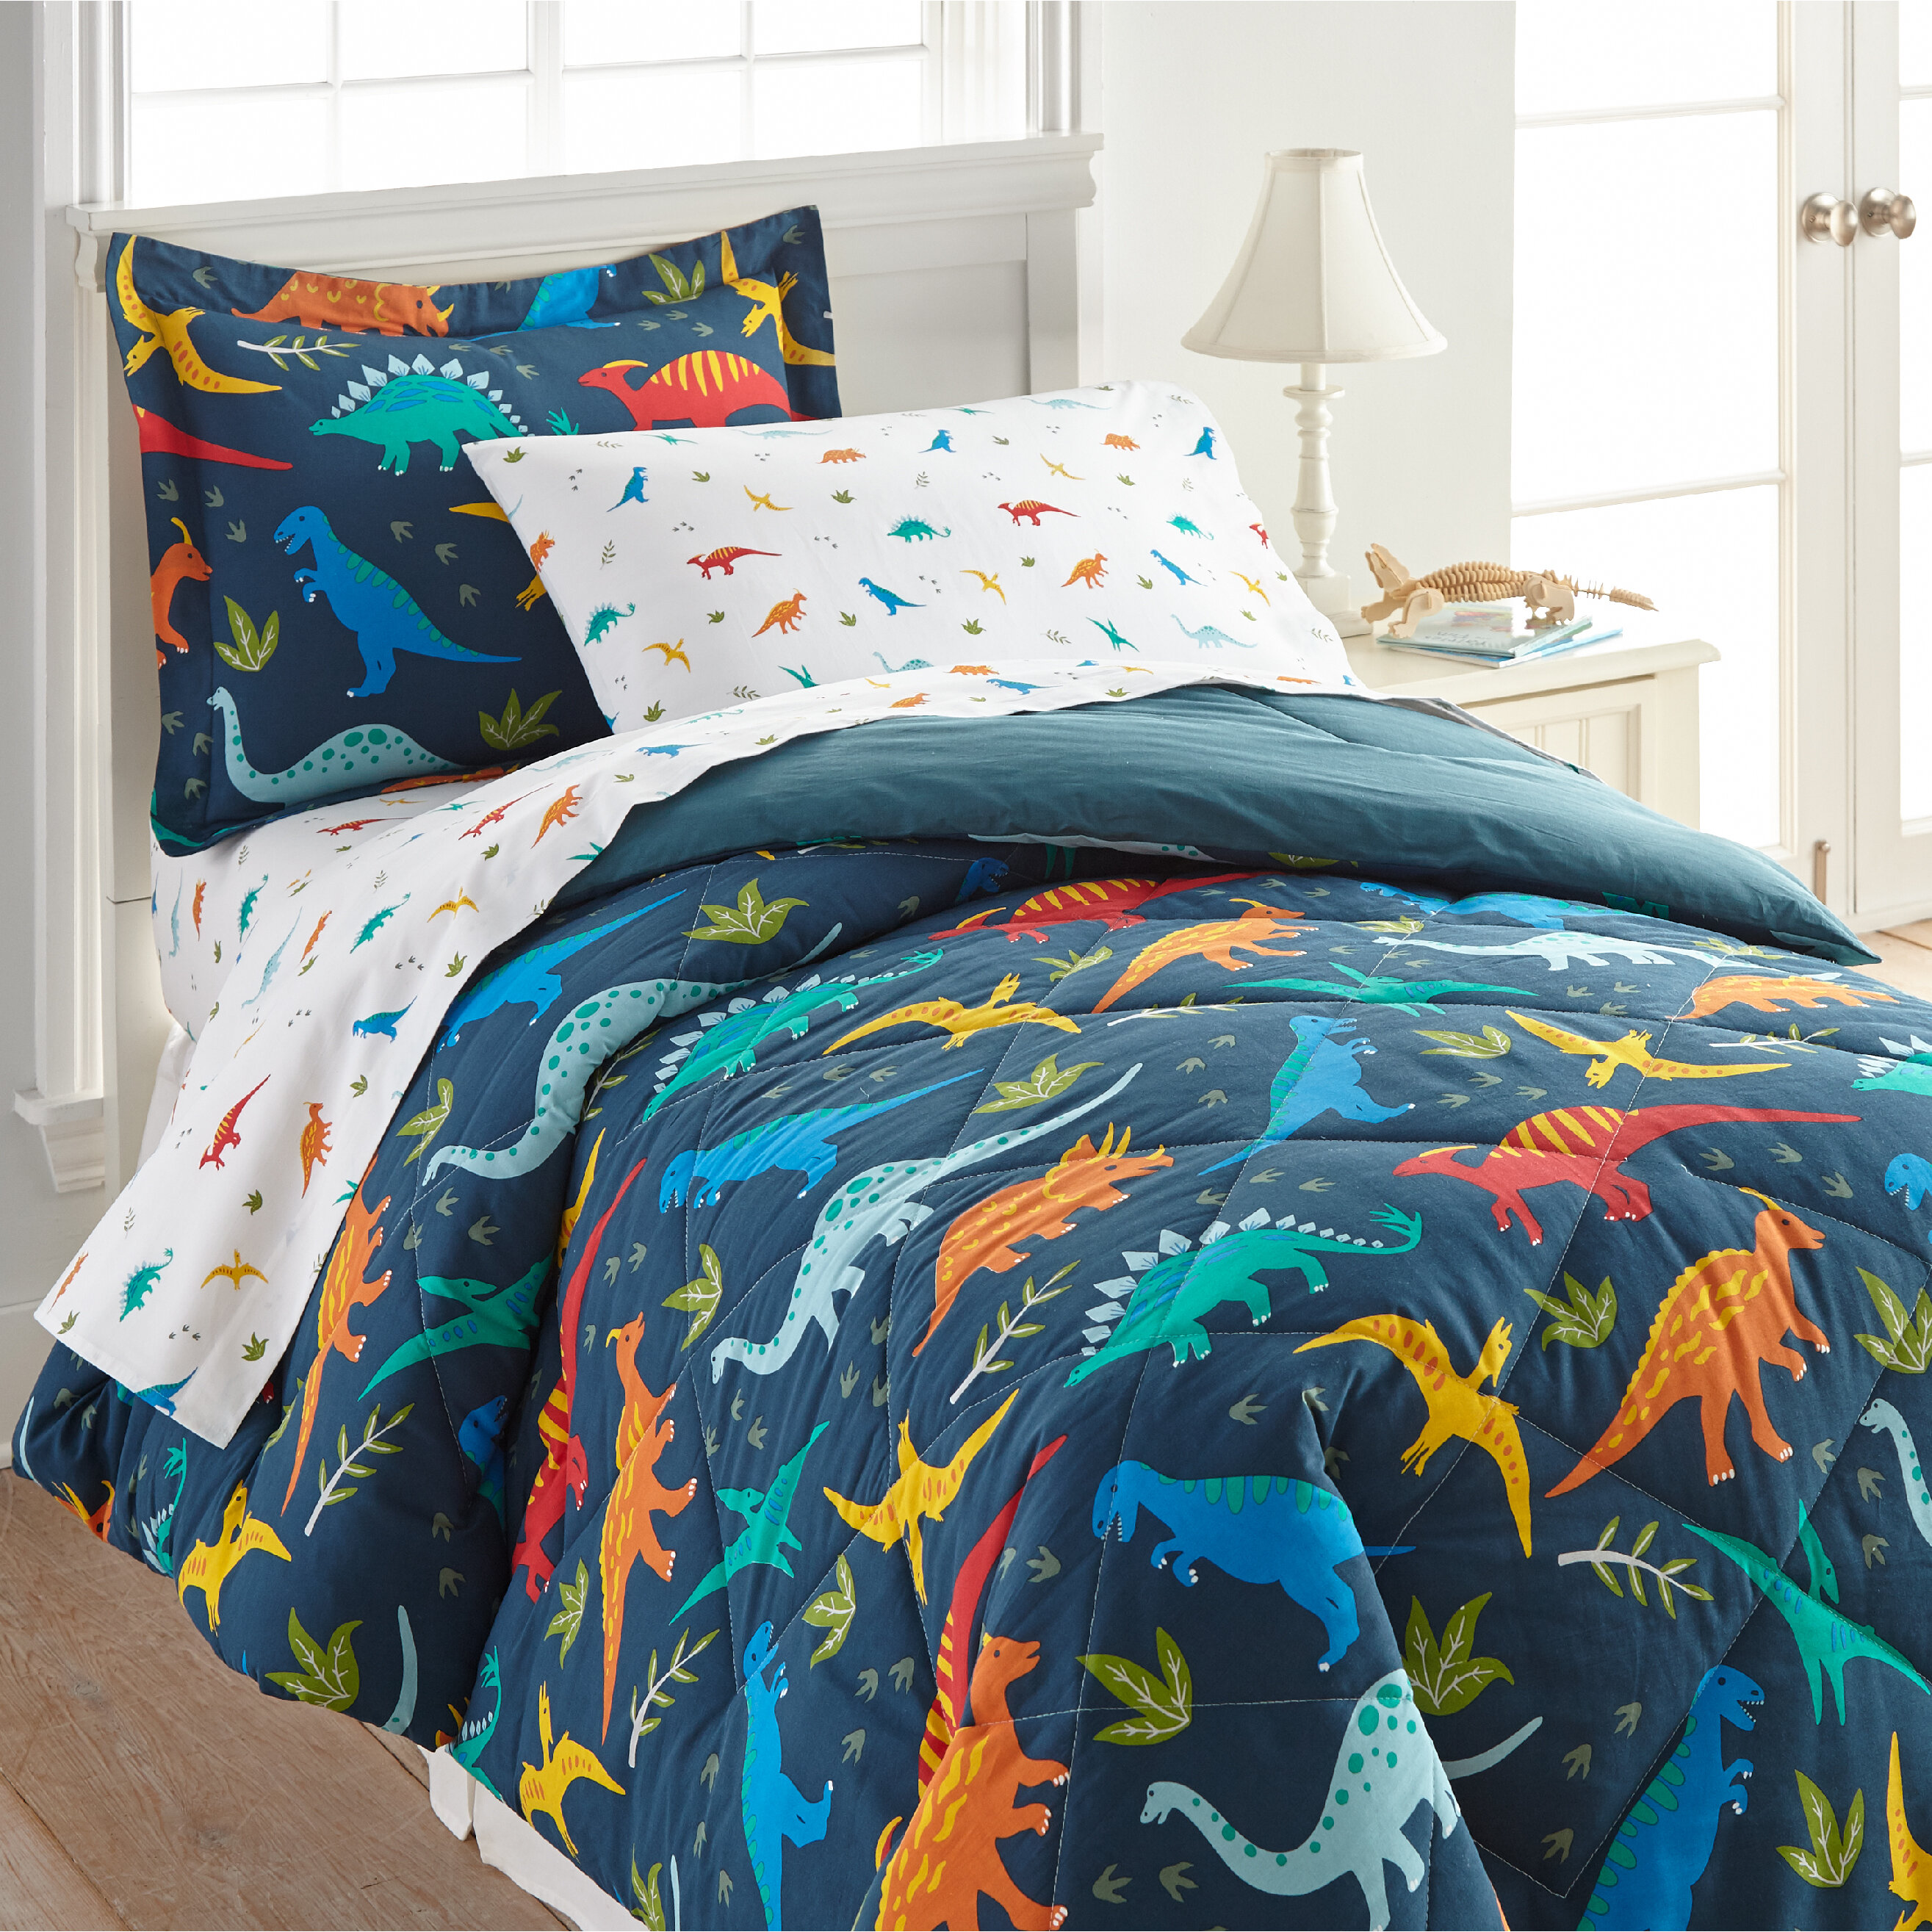 118 X 95 Cal King Dinosaur Quilt Set Childrens Reversible Bedspread Coverlet Queen Size Bed Cover 3-Piece Oversize California White, Orange, Green, Grey